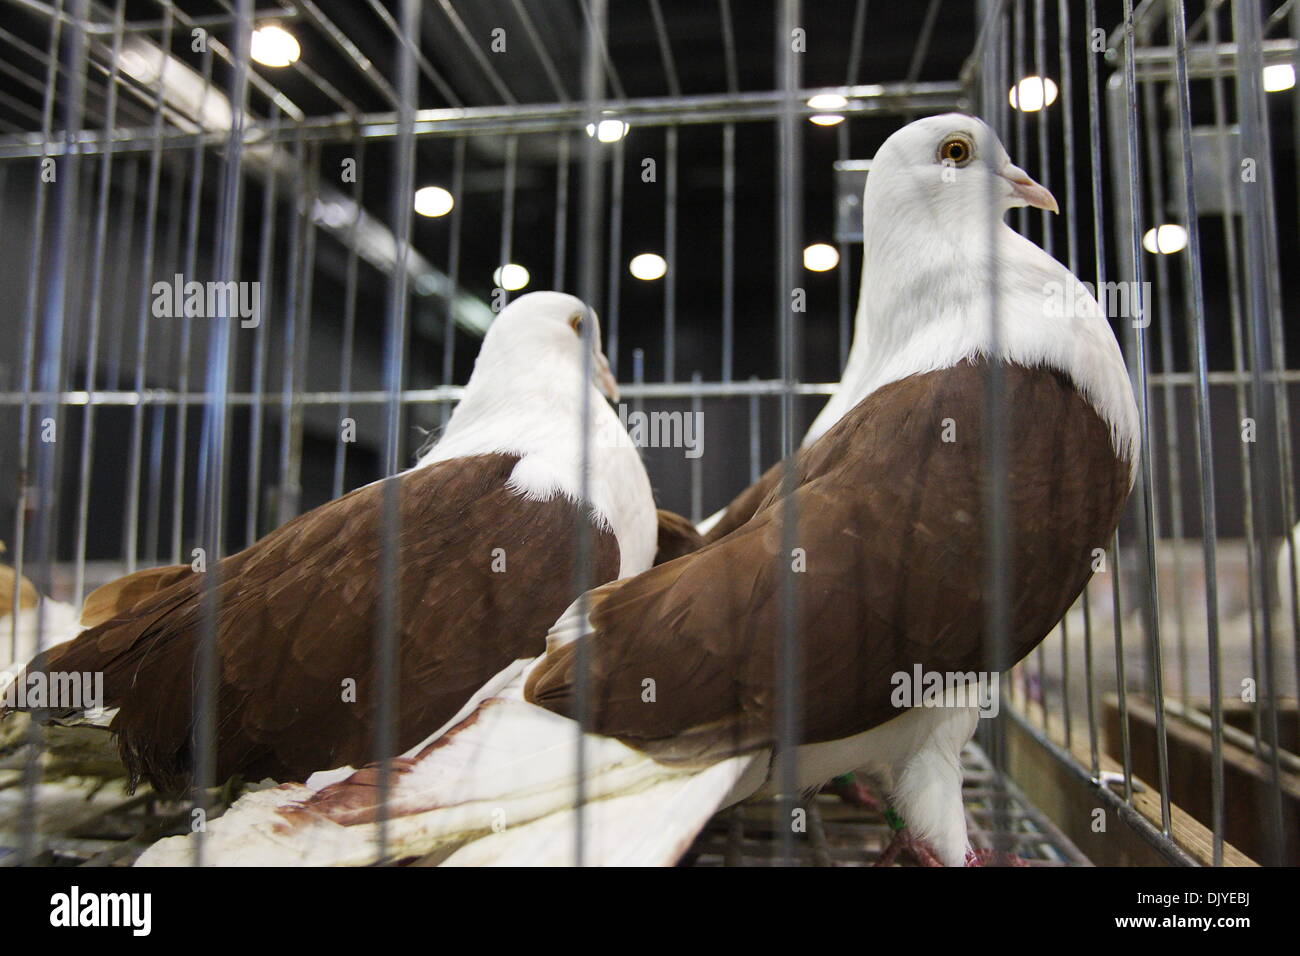 Gdansk, Poland. 1st Dec 2013. 8th International Fair of Pigeon Post and Acessories at Amber Expo hall in Gdansk. Exhibitors show carrier pigeons and take part in auction of pigeons from the Polish, Dutch, German and Belgian pigeons reputable kennels. Credit:  Michal Fludra/Alamy Live News Stock Photo